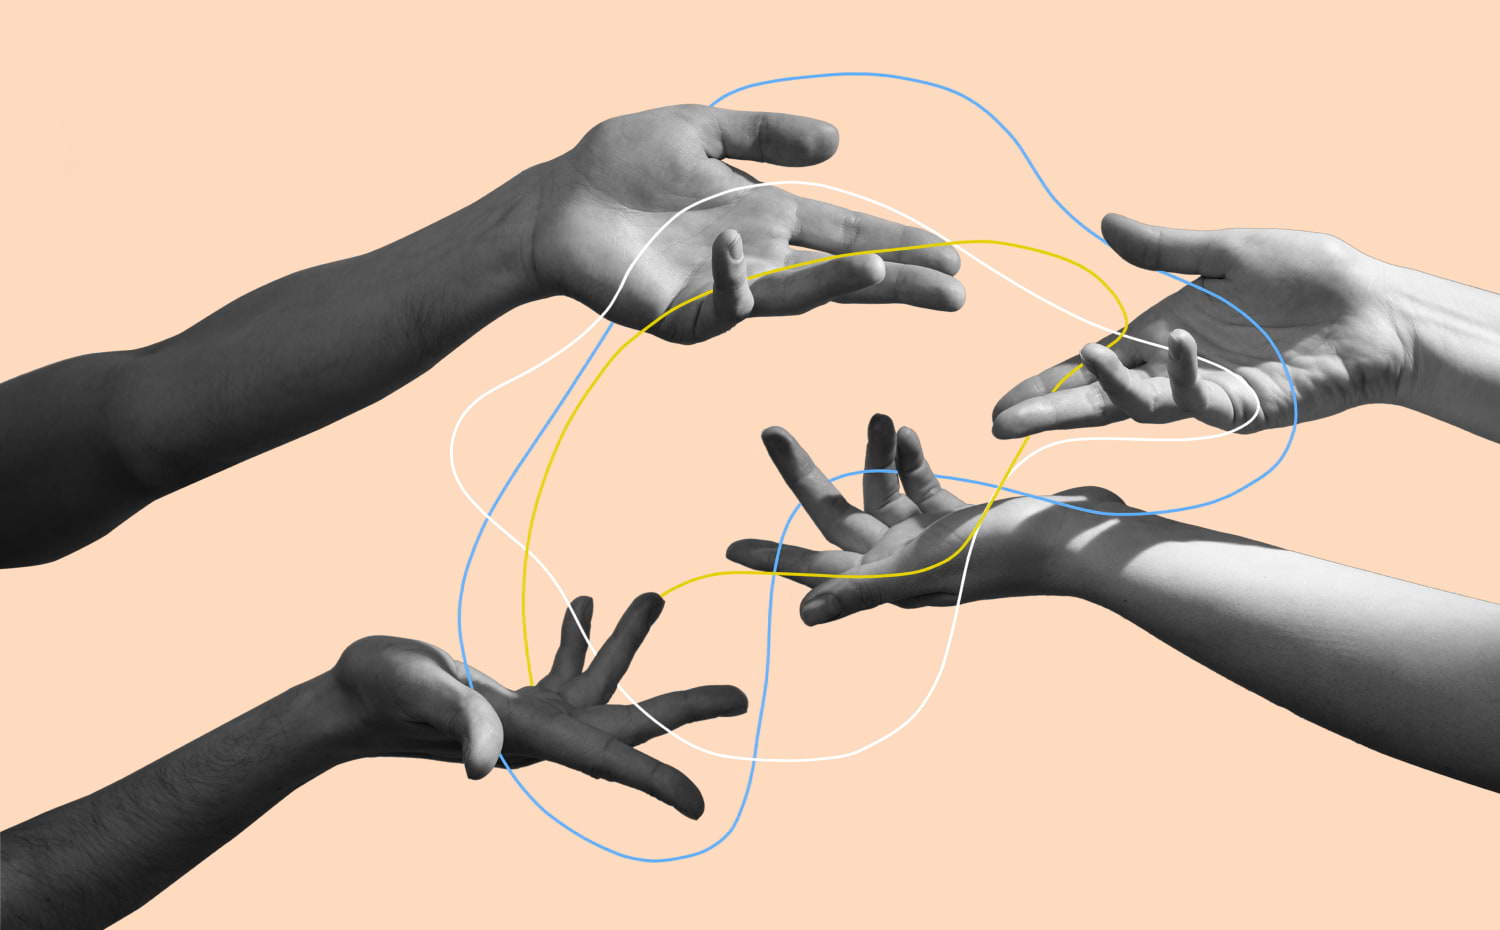 Four open hands form a square. Blue, yellow, and white loops connect the hands.